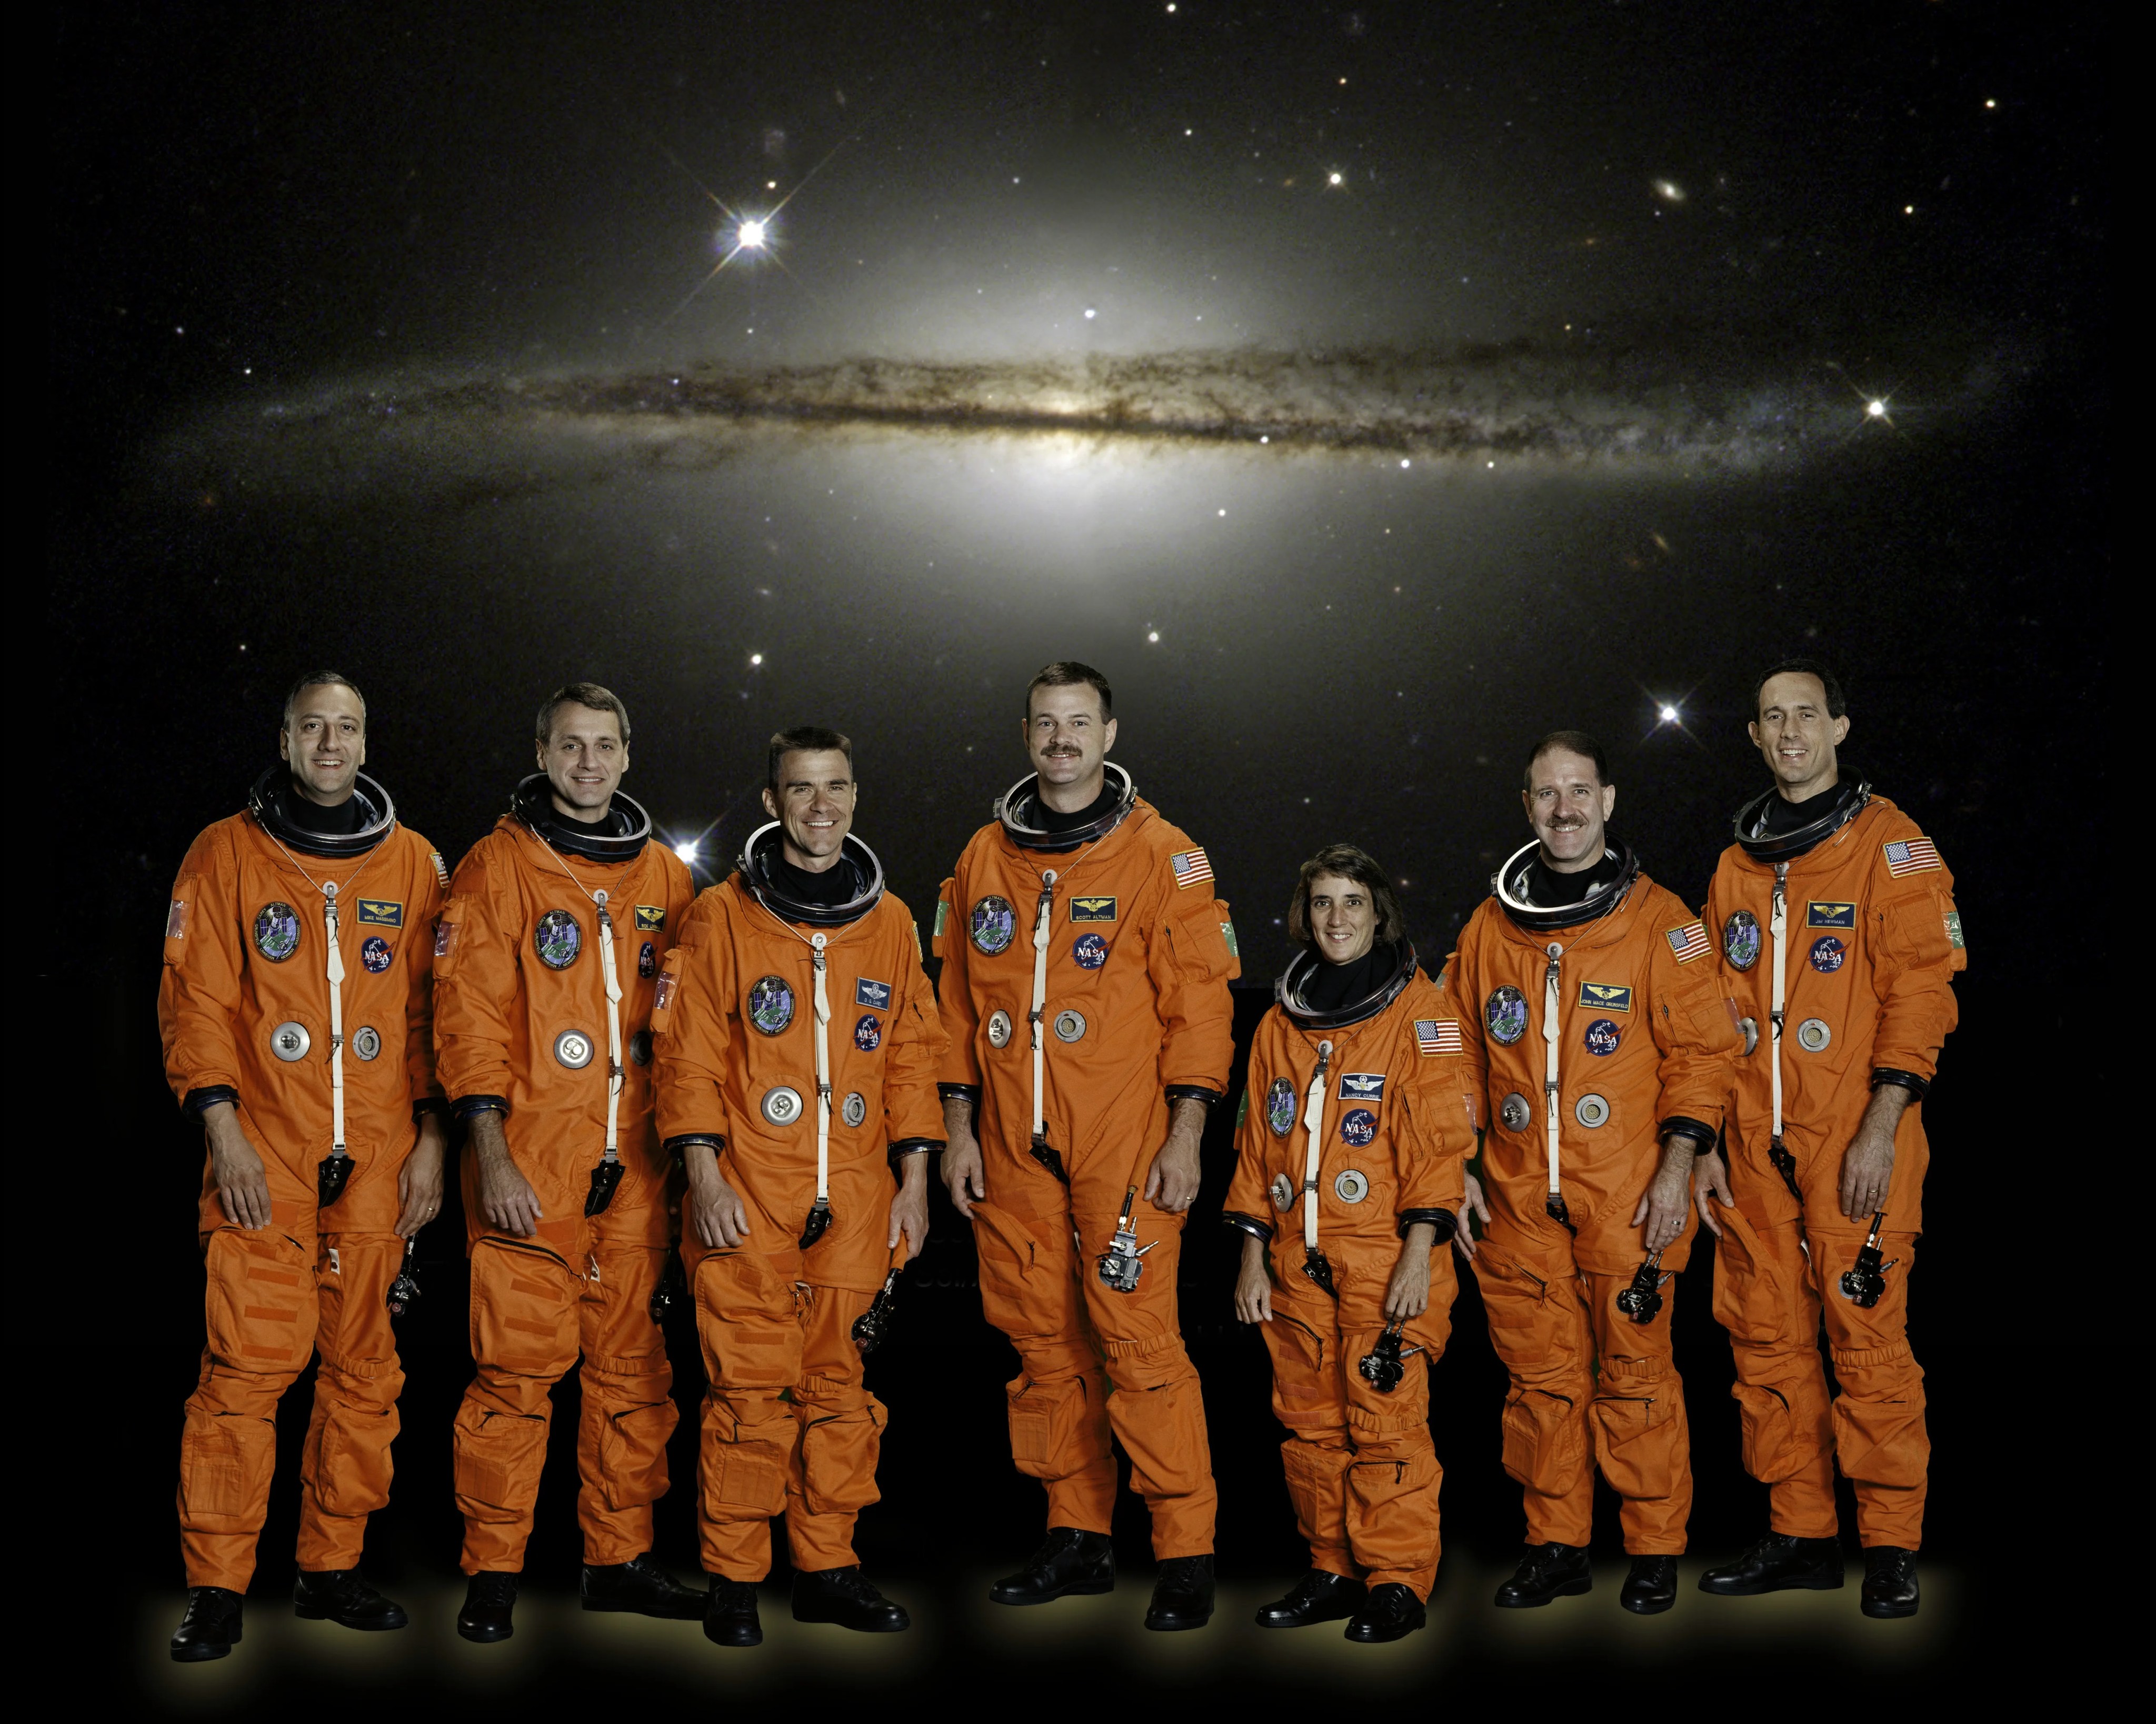 Seven astronauts in orange space suits stand in a line. The dusty arm of a spiral galaxy disc hovers above their heads in the backdrop.